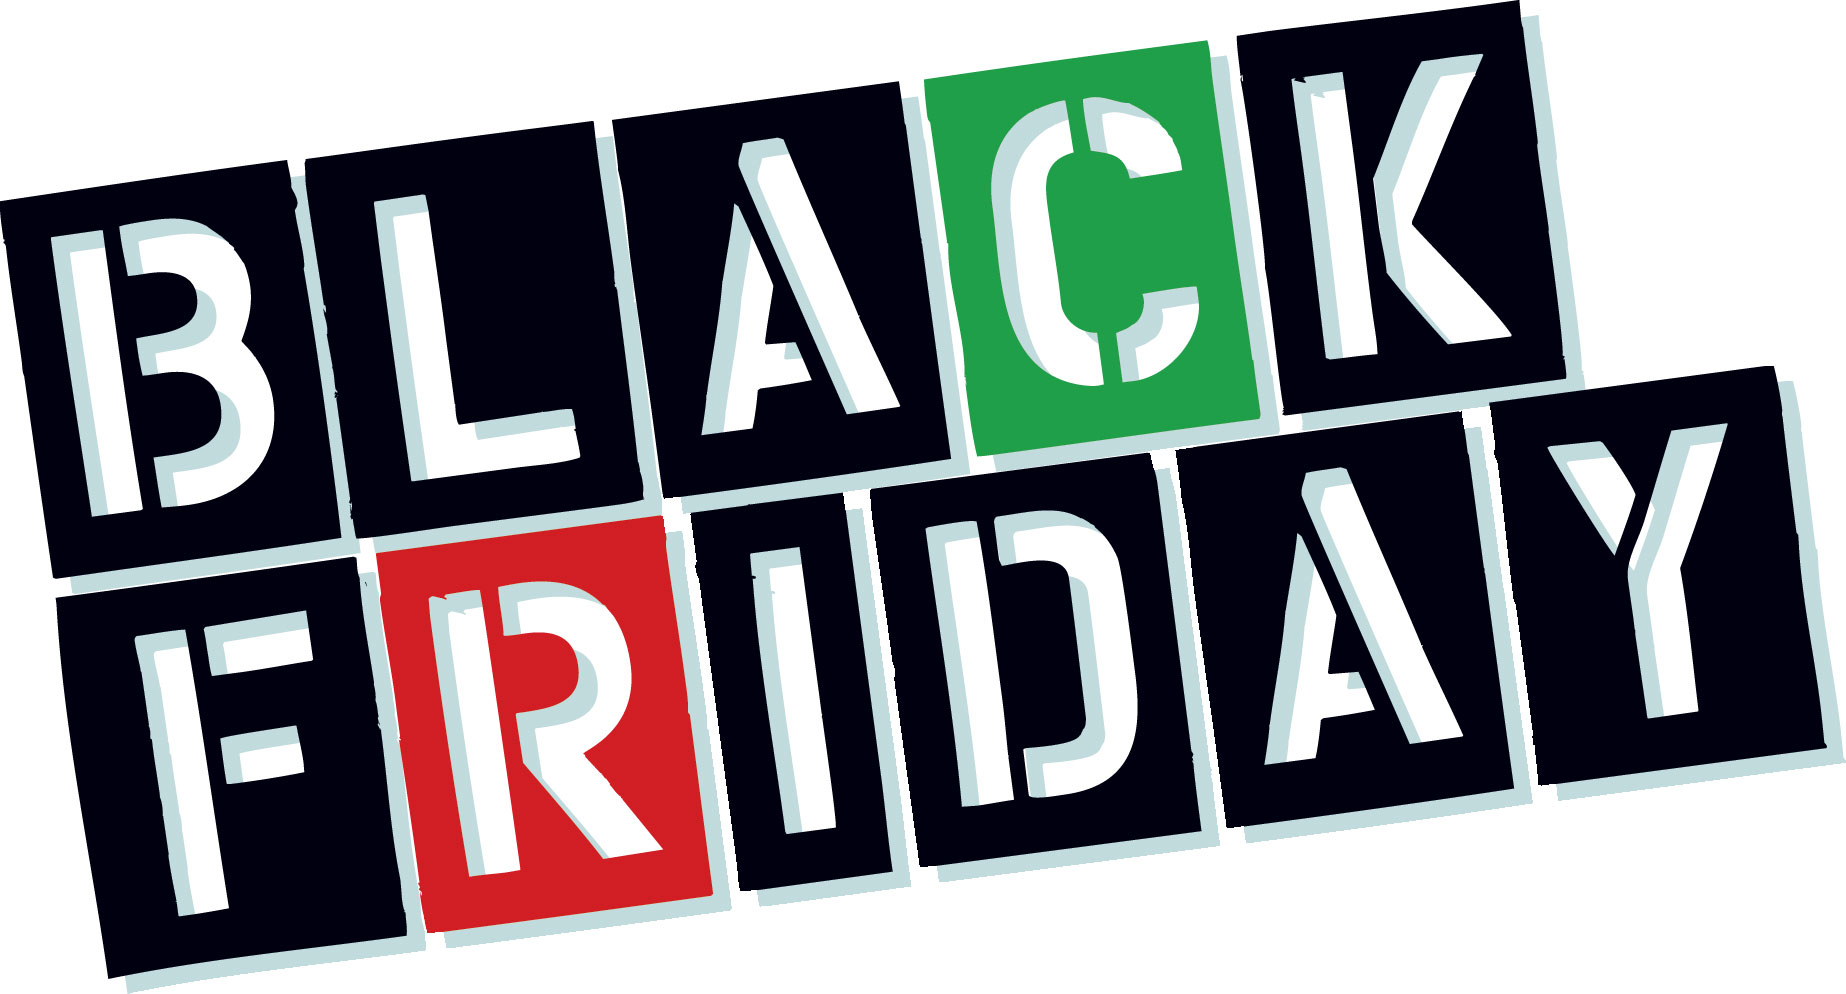 How Prepared are you for Black Friday? The Official 360logica Blog